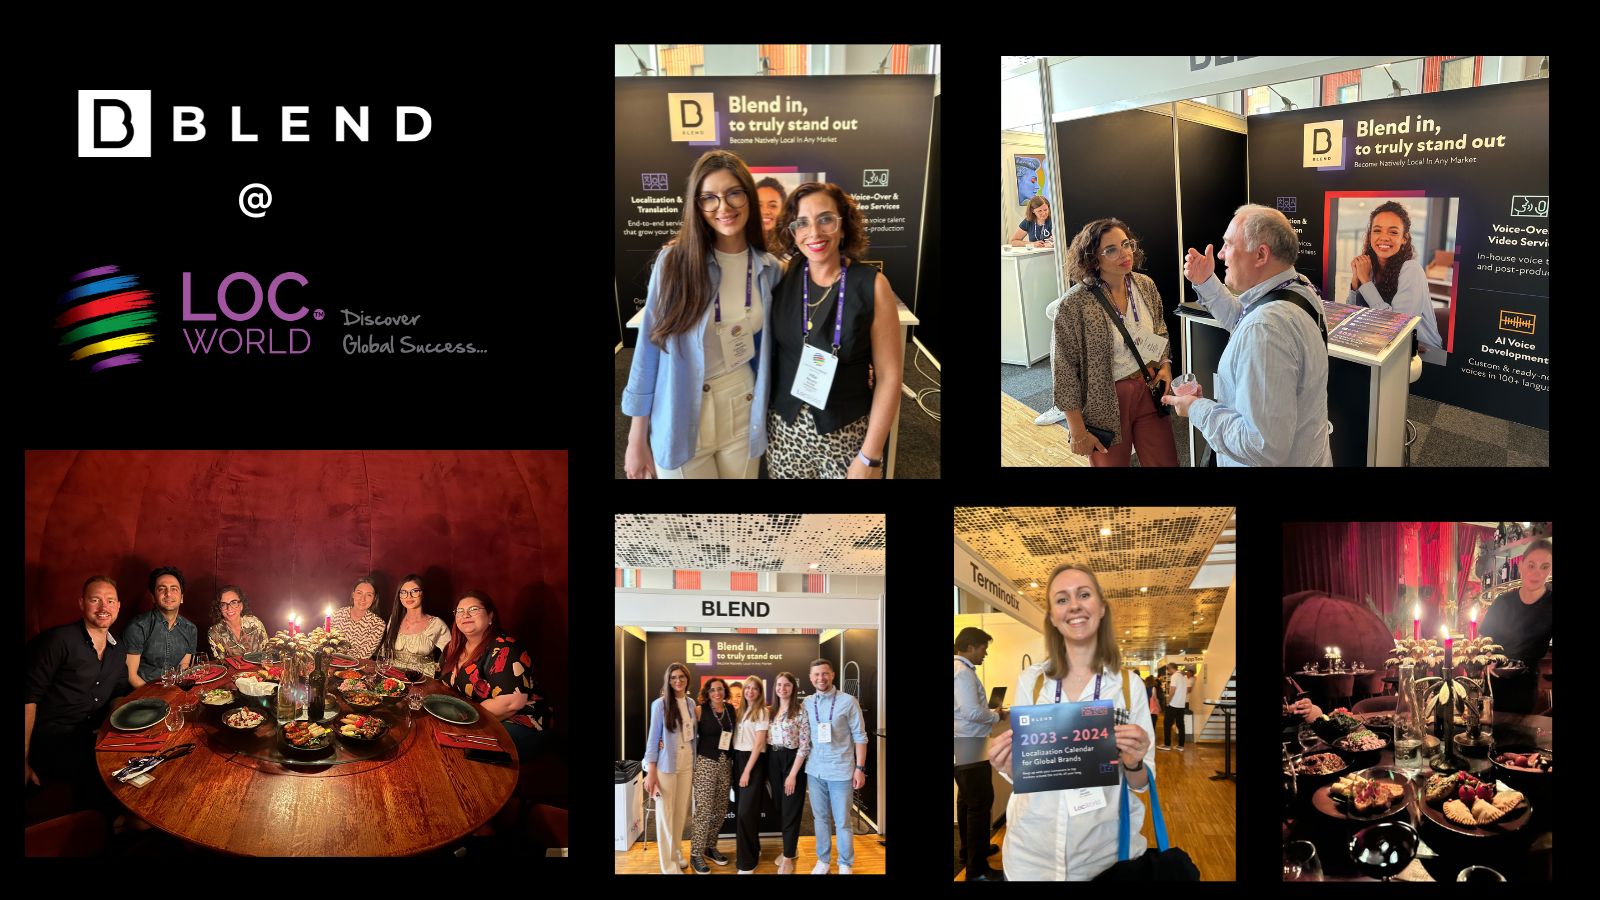 BLEND Returns to LocWorld with Expanded Loc & AI Voice Capabilities